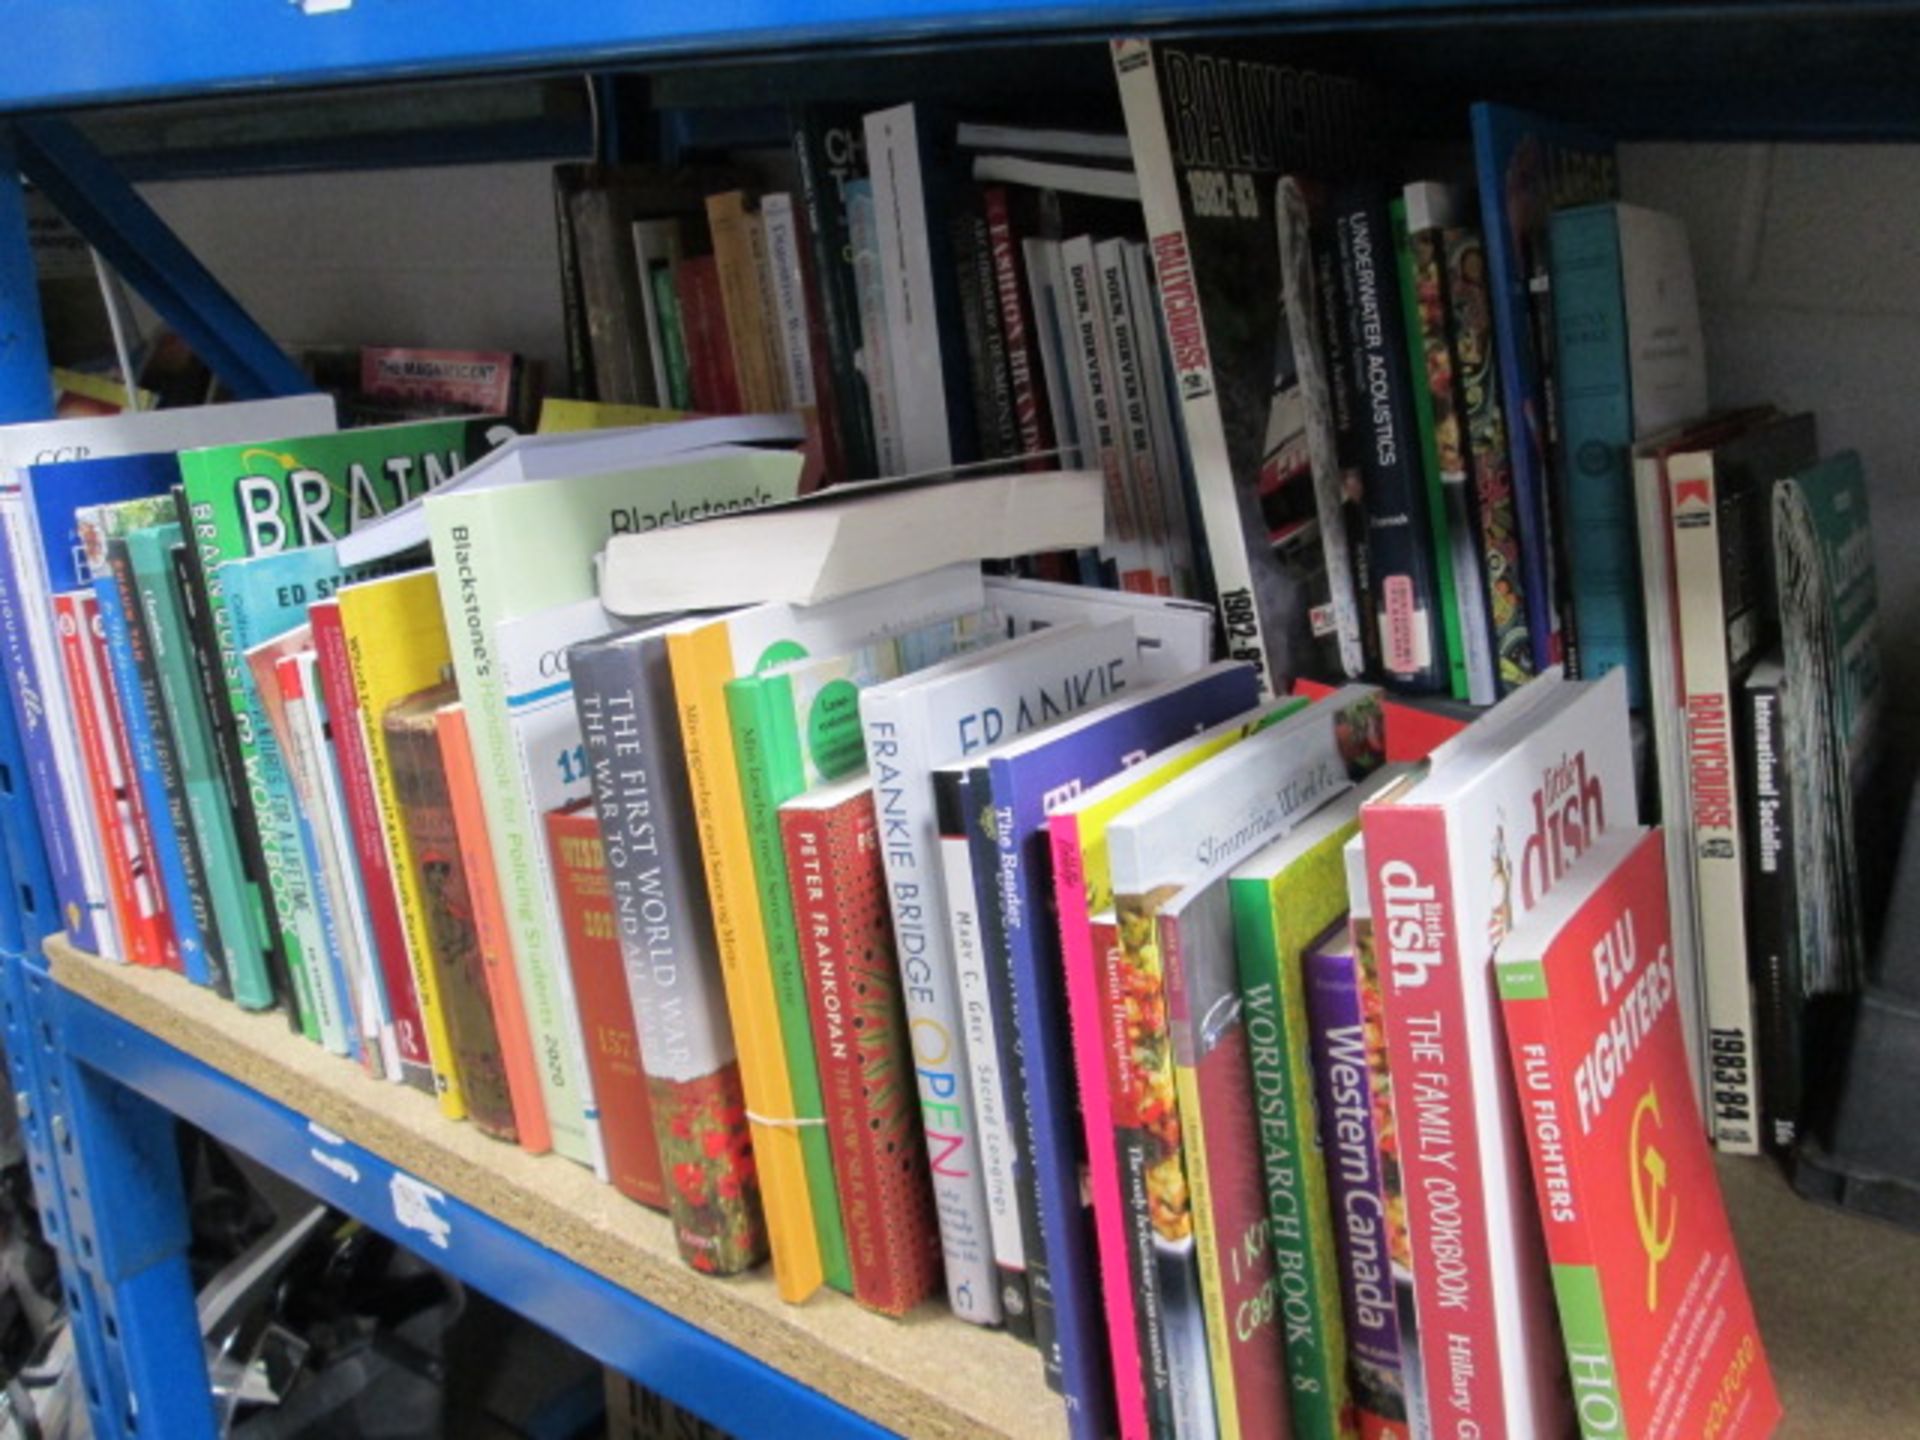 Shelf comprising of hardback and paperback reference materials and children's books etc